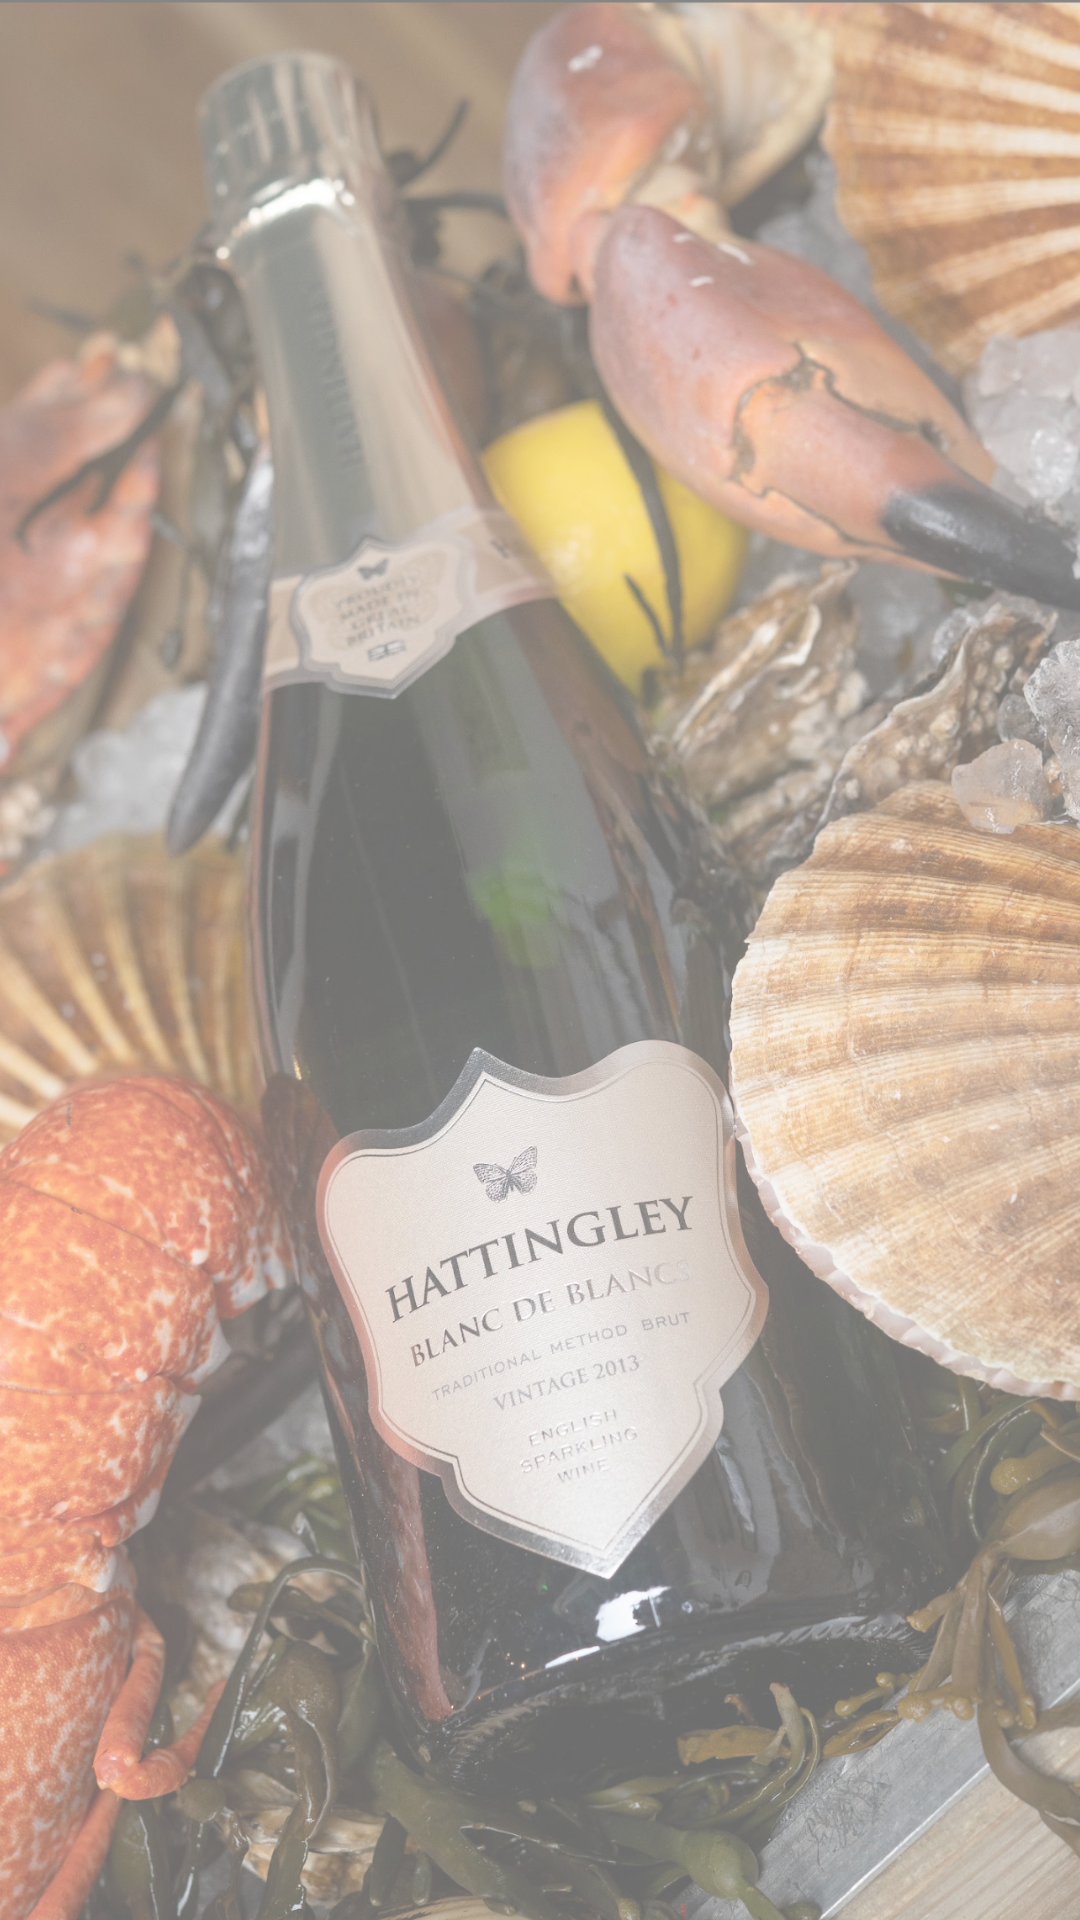 Lymington Food Festival, 12th - 14th July, Image of Hattingley valley blanc de blancs english sparkling, surrounded by seafood and shells